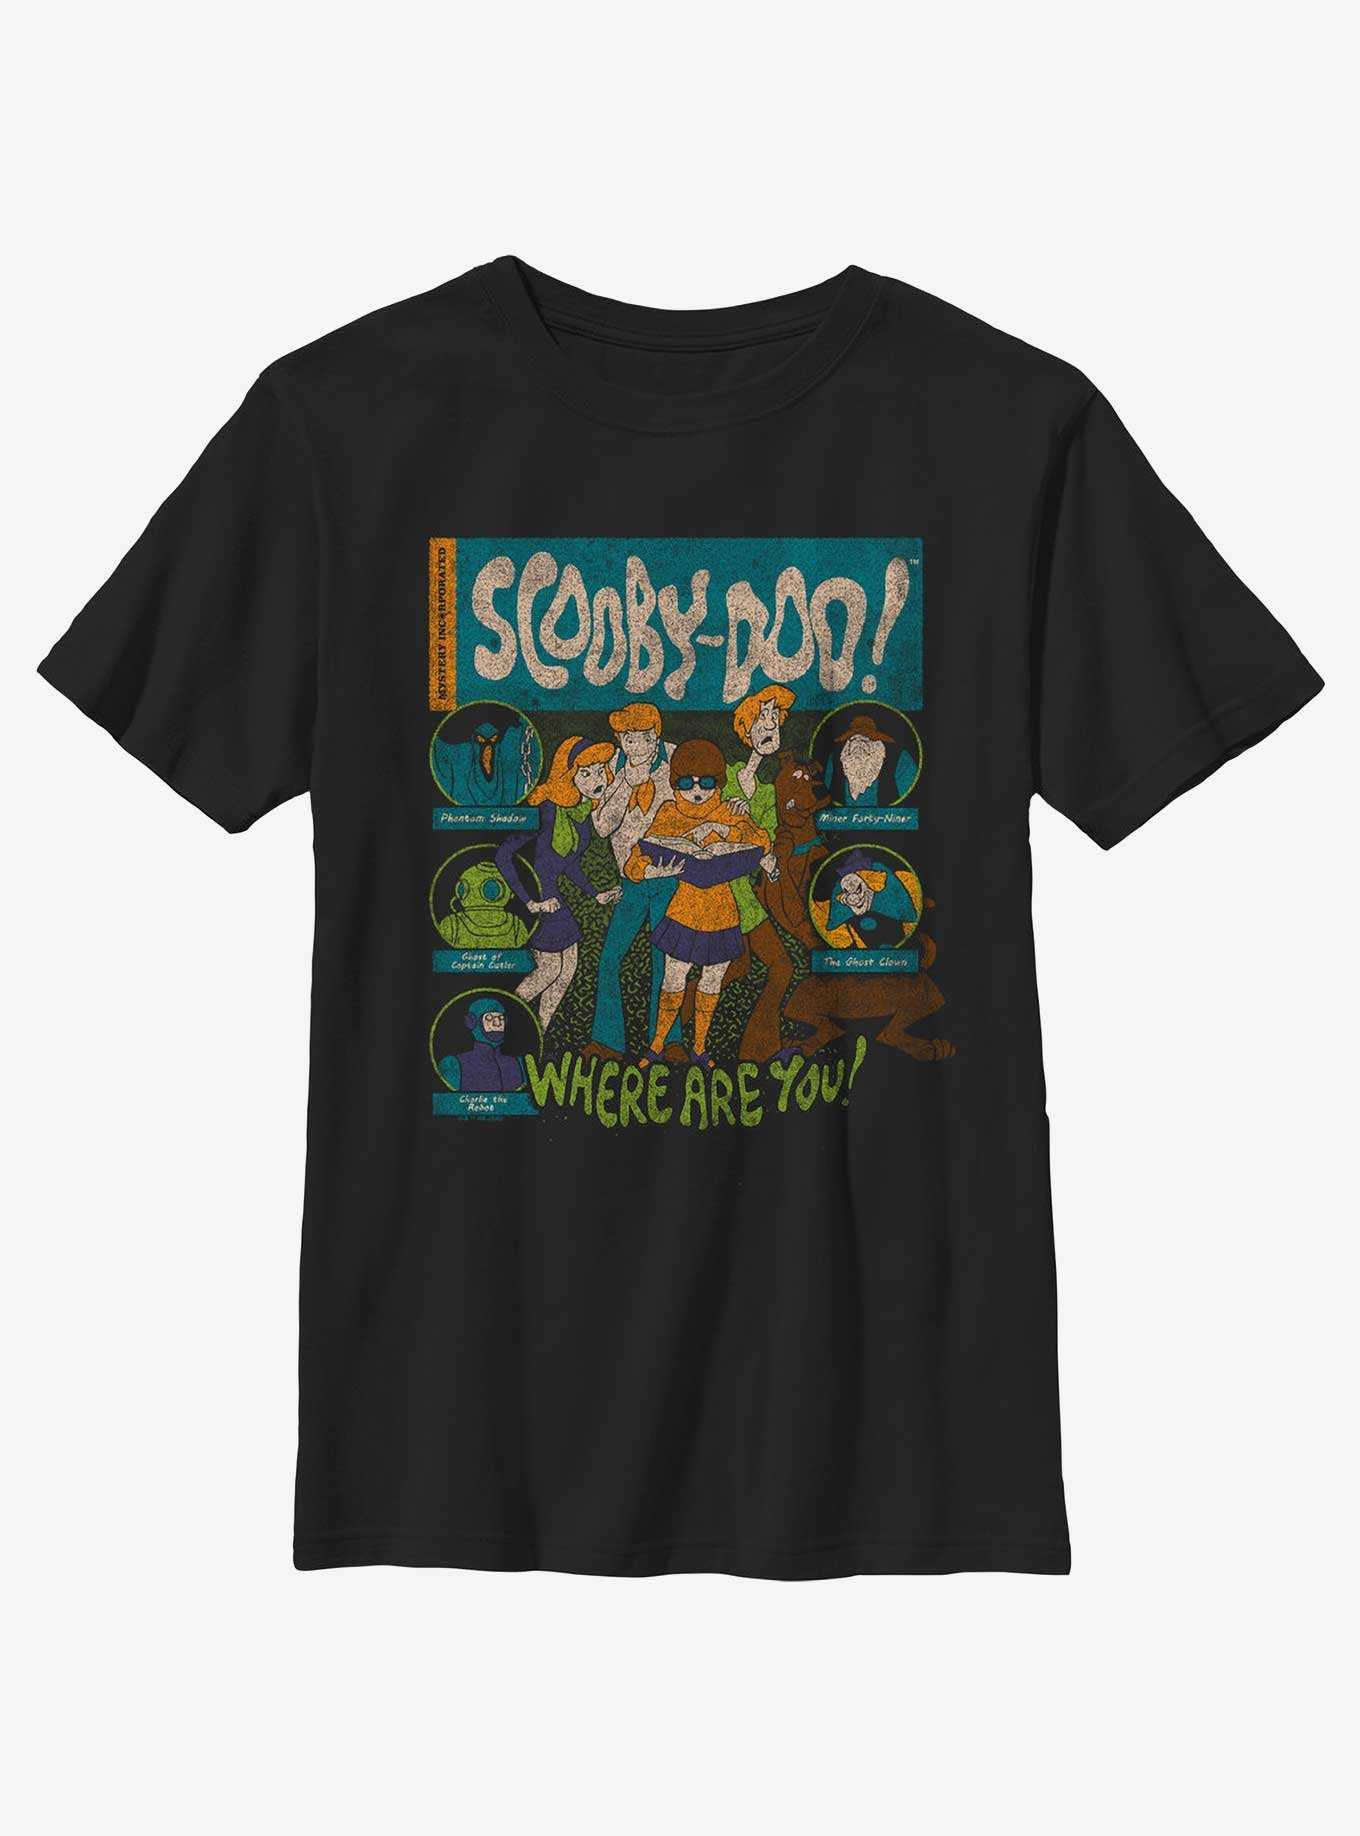 Scooby Doo Mystery Poster Youth T-Shirt, , hi-res